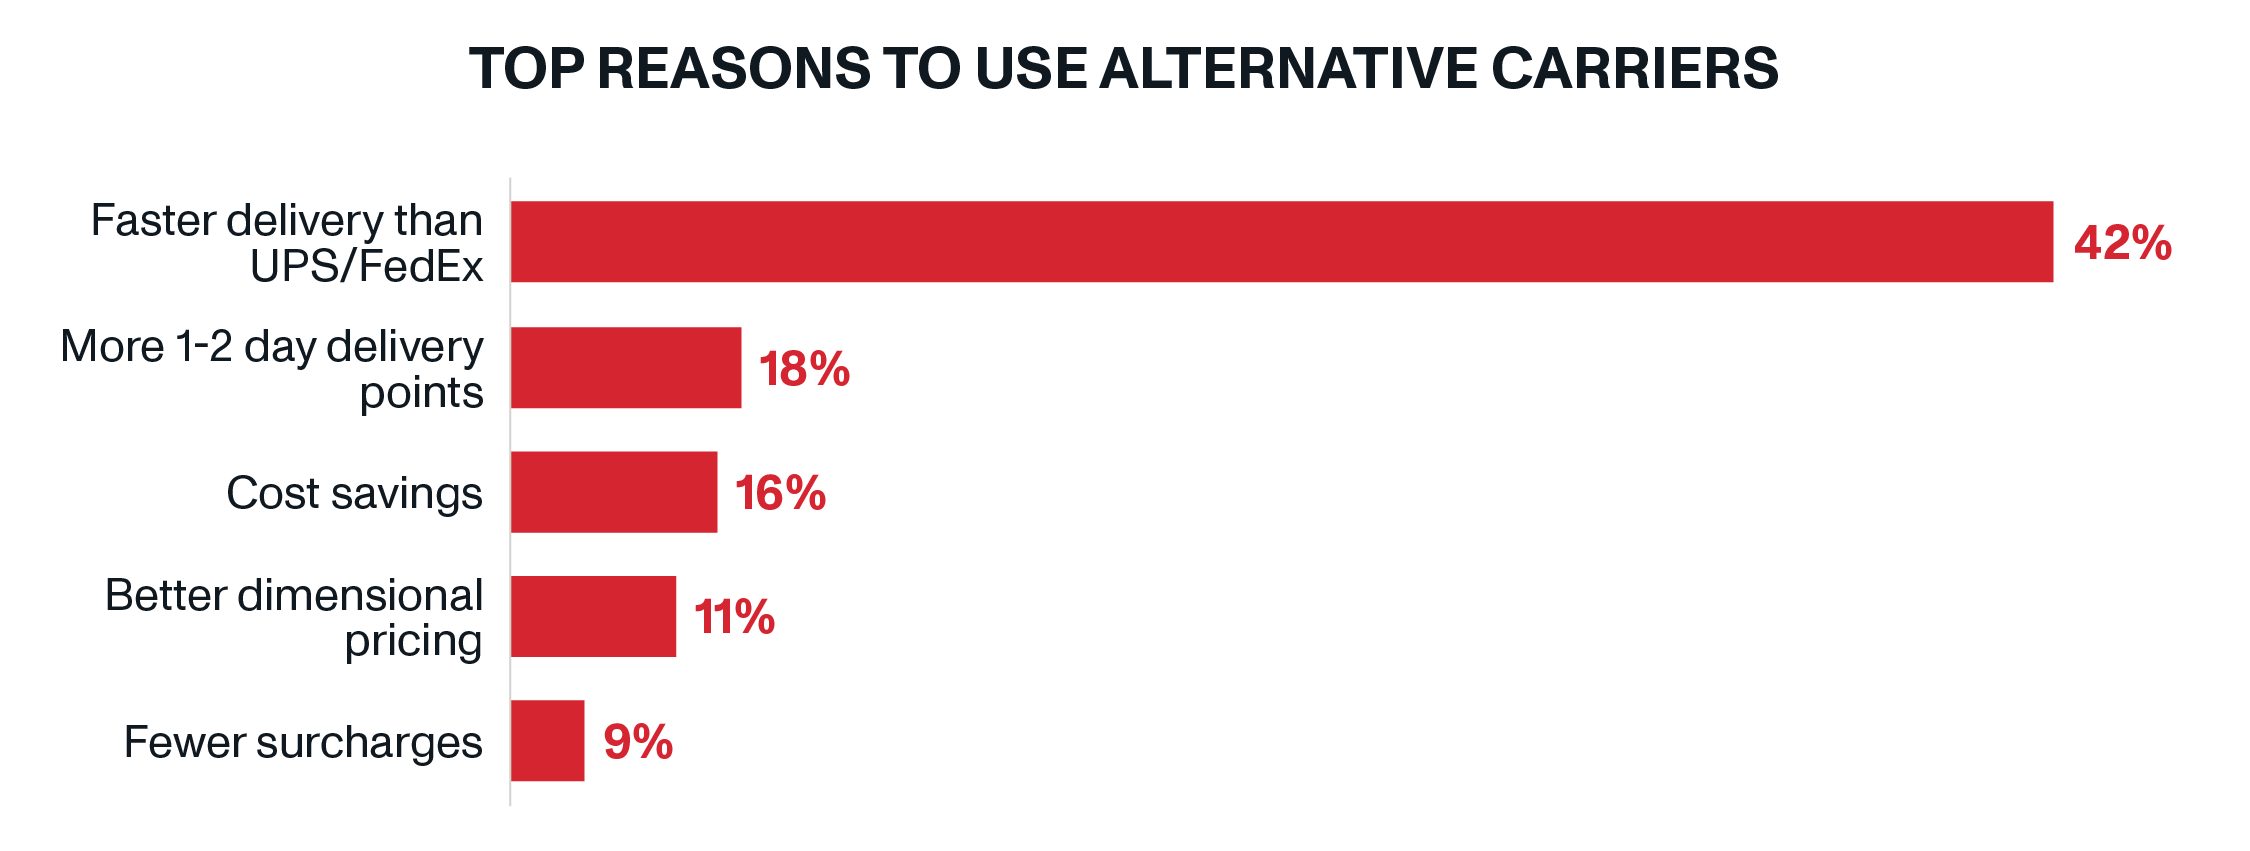 Top Reasons to Use Alternative Carriers | Current Use of Alternative Carriers | OnTrac Carrier Diversity | How Retailers Are Leveraging Alternative Carriers to Meet Consumer Expectations